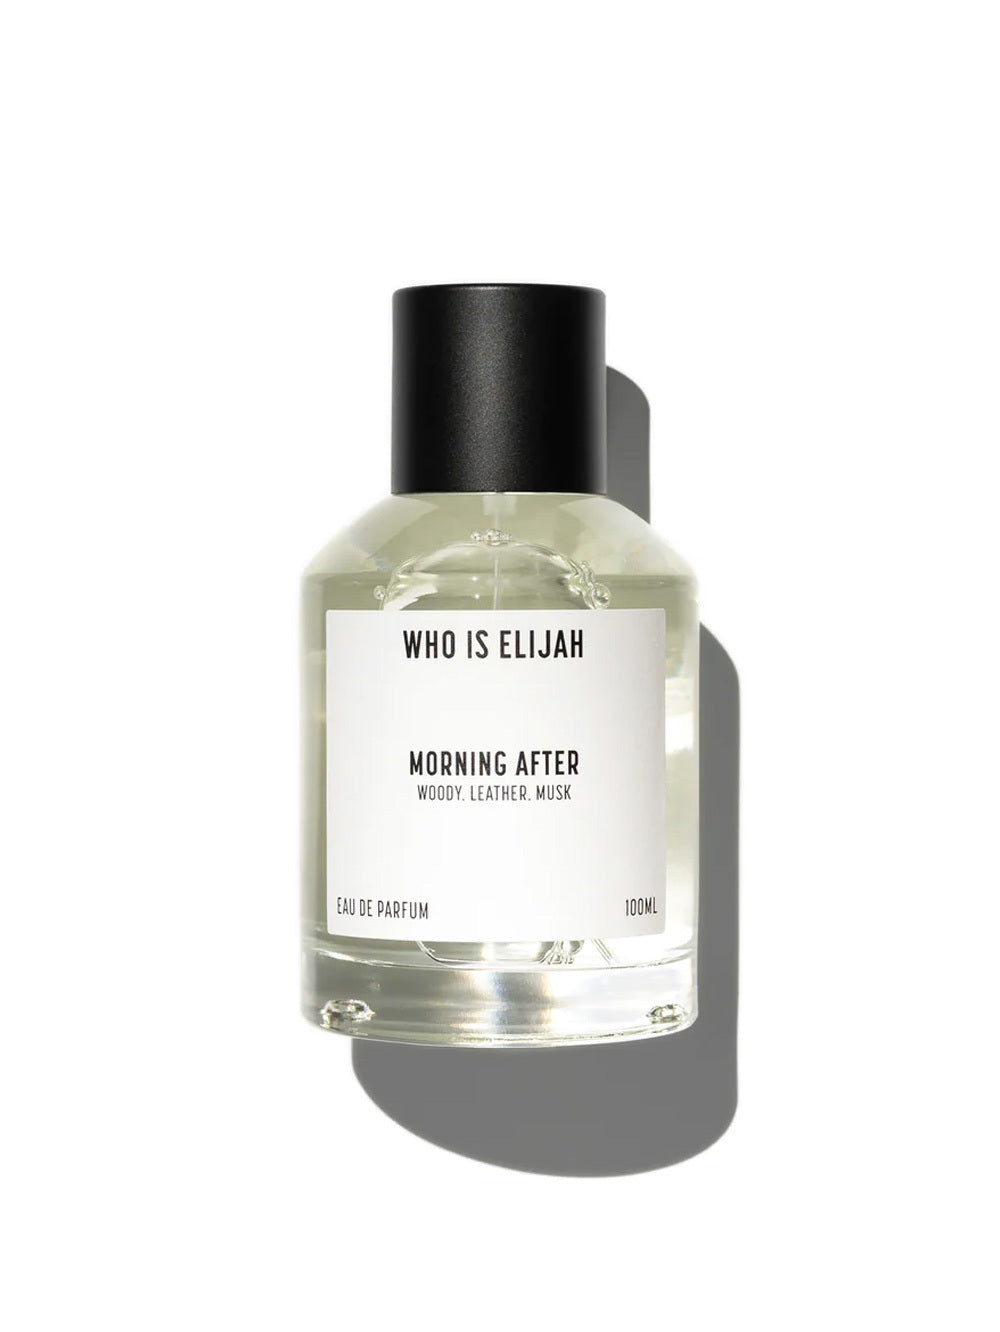 MORNING AFTER 100ML - Who Is Elijah